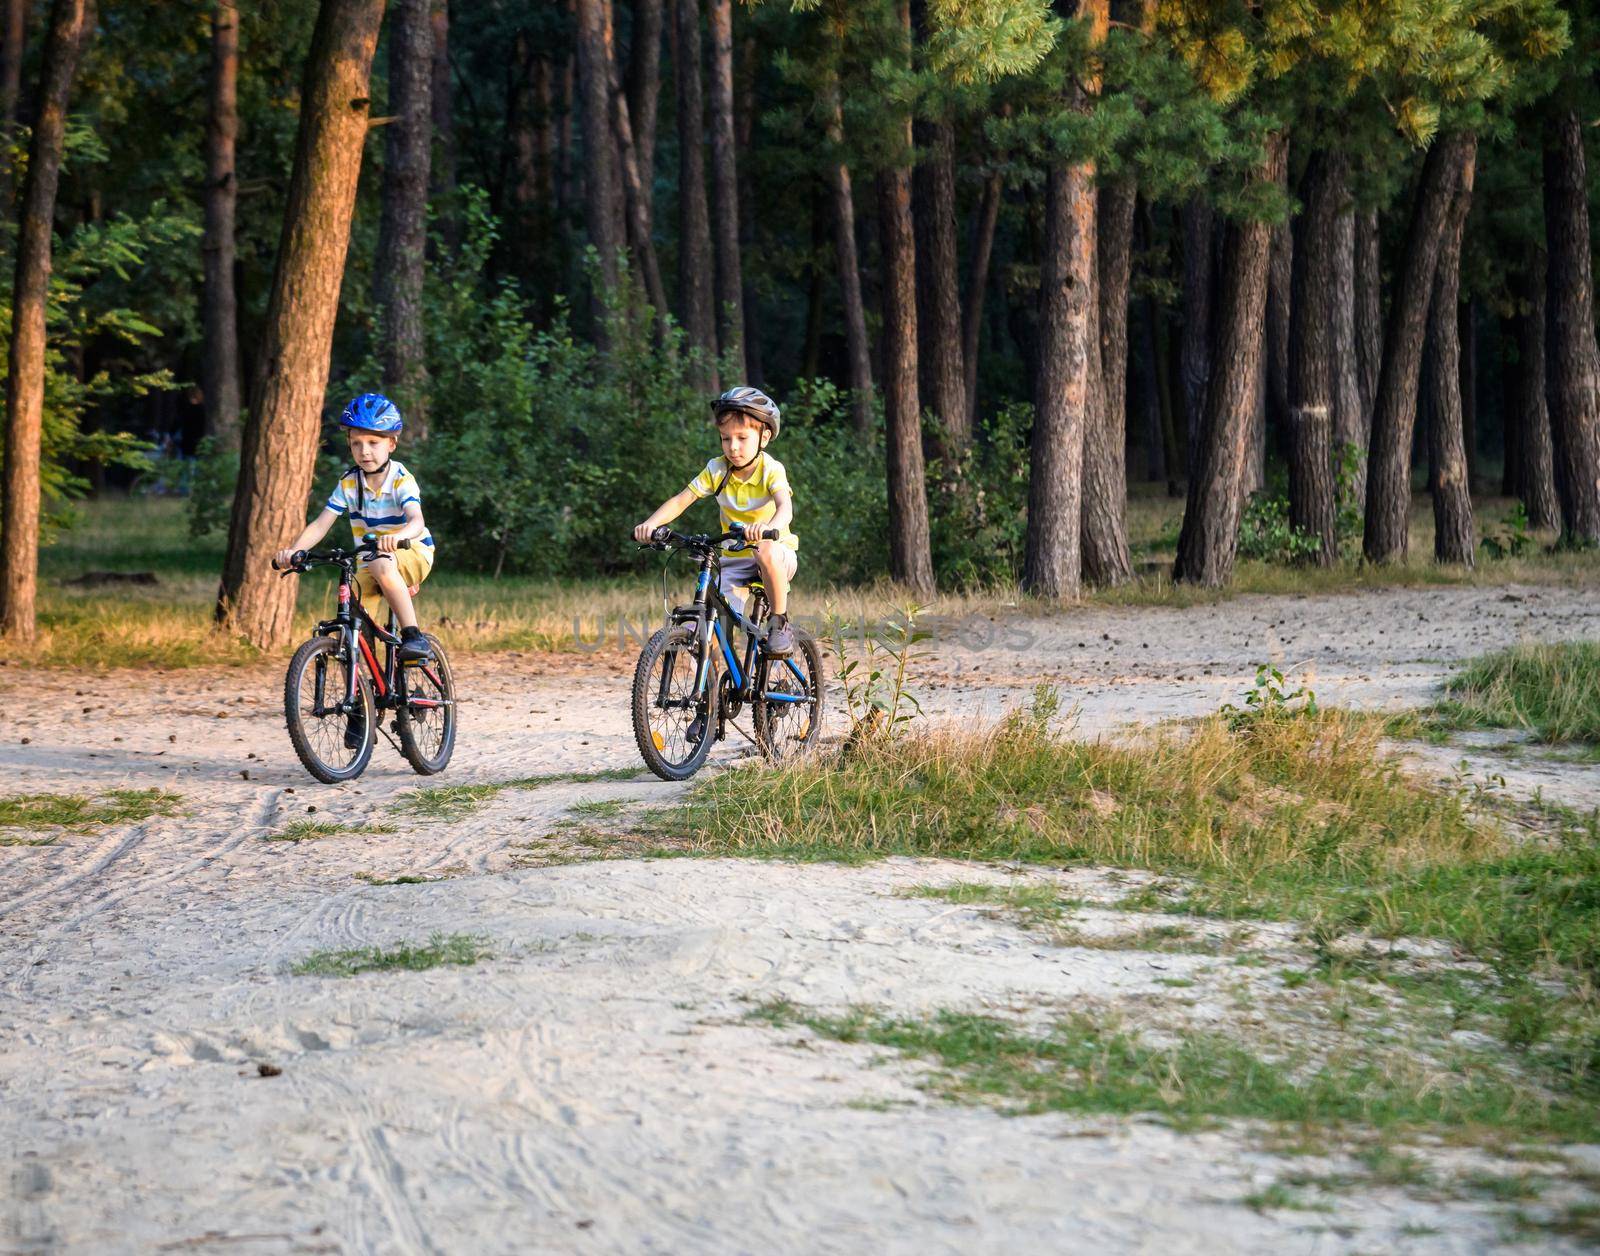 Two active little sibling boys having fun on bikes in forest on warm day. by Kobysh